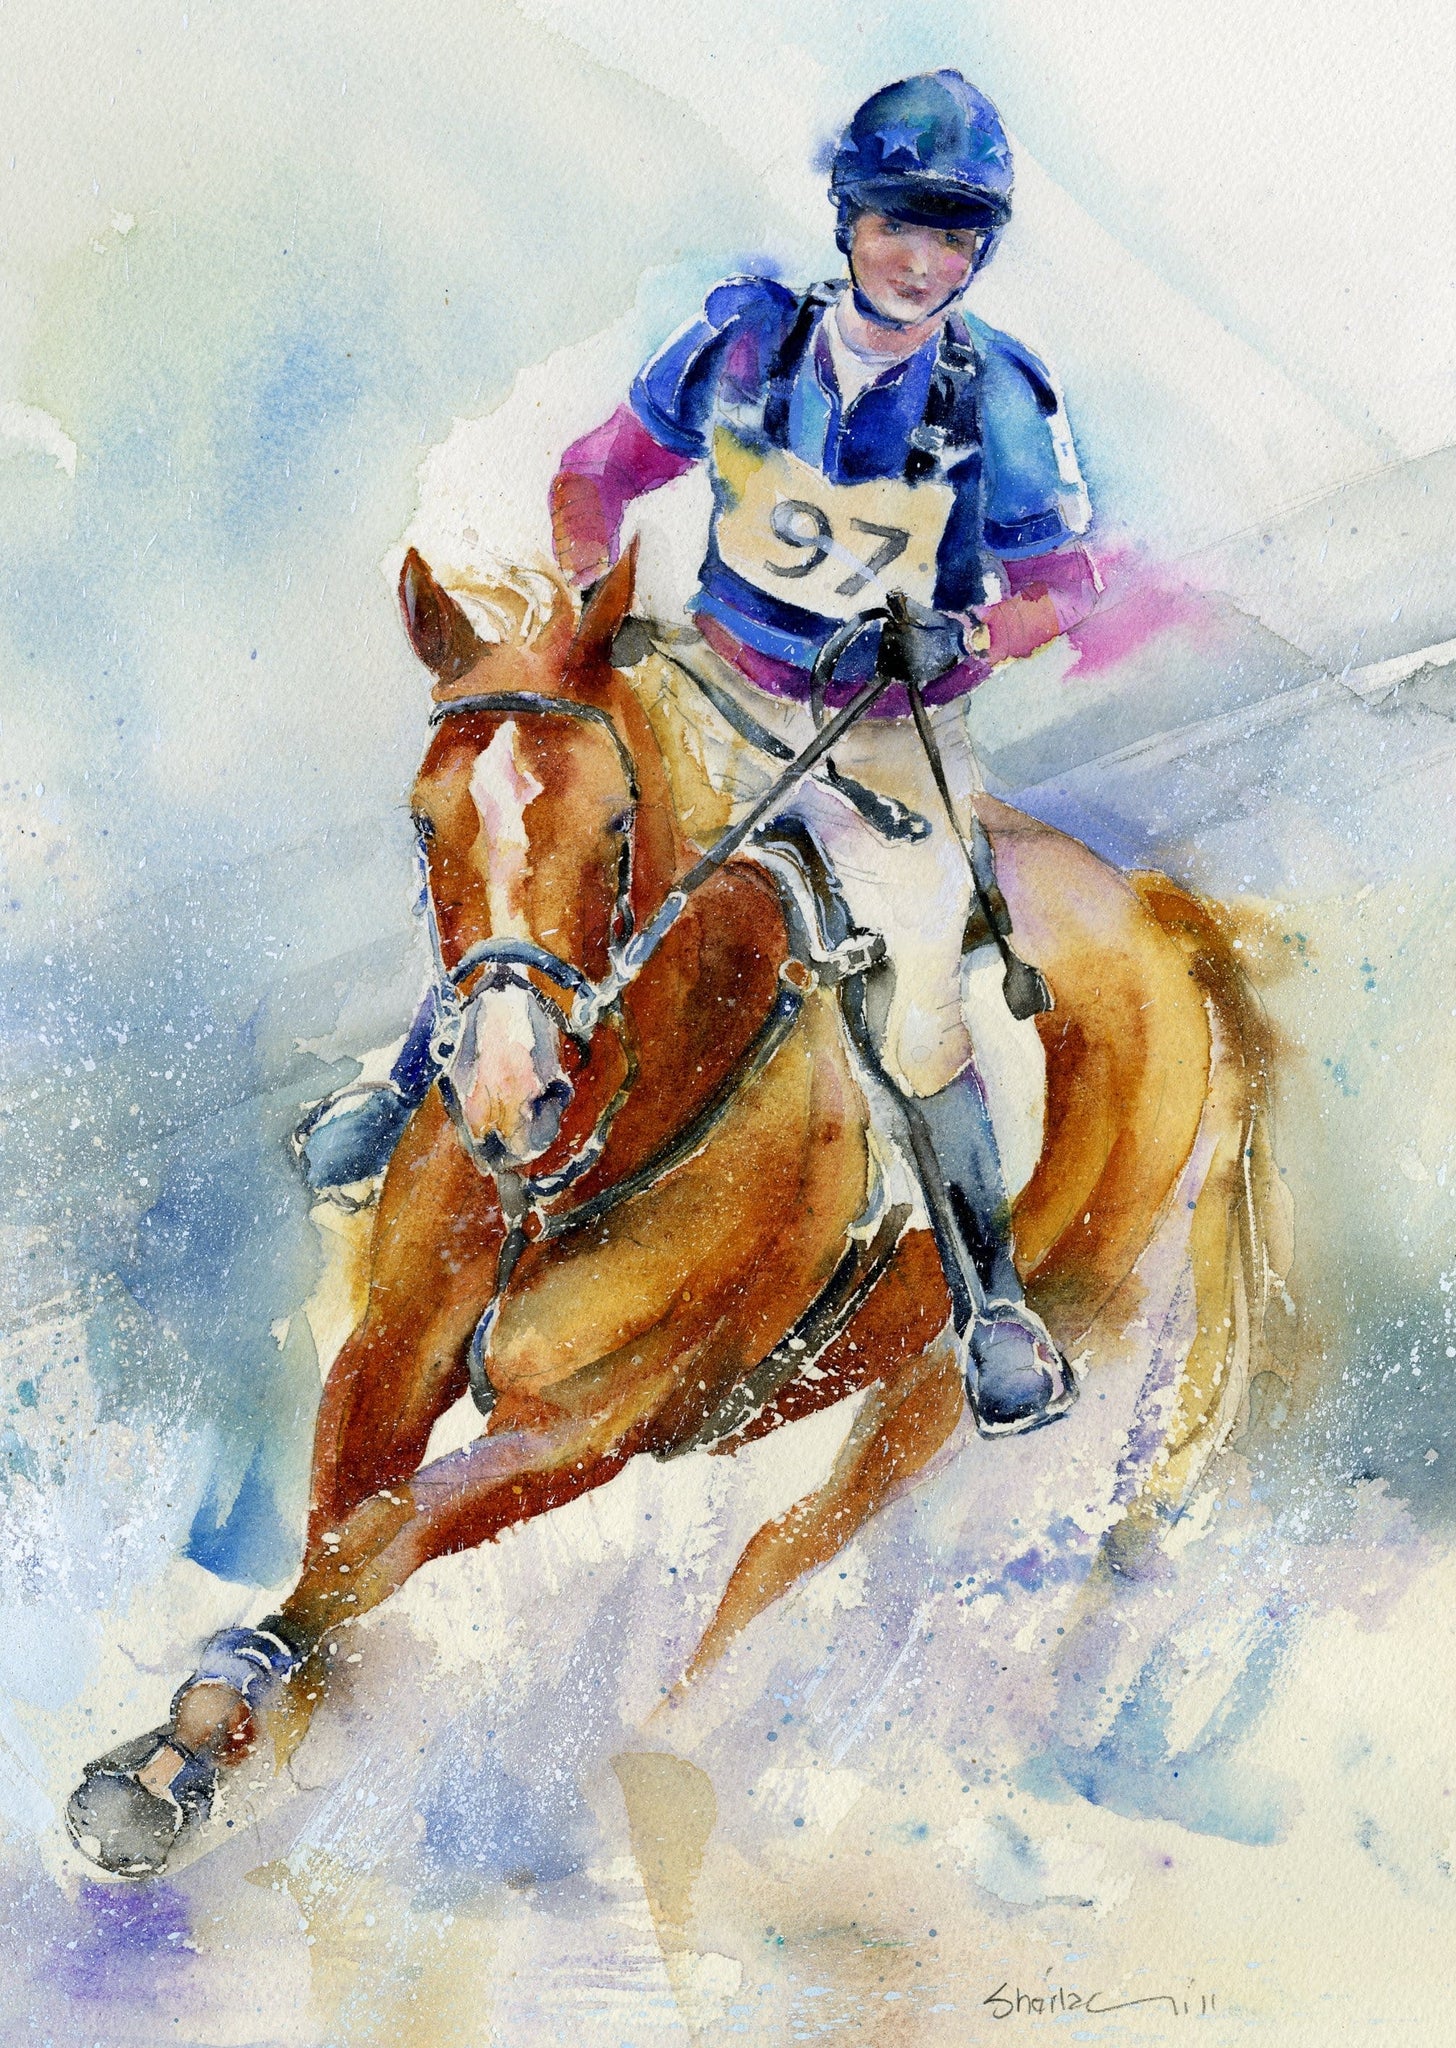 At the Water: Horse Racing Art Print designed by artist Sheila Gill
